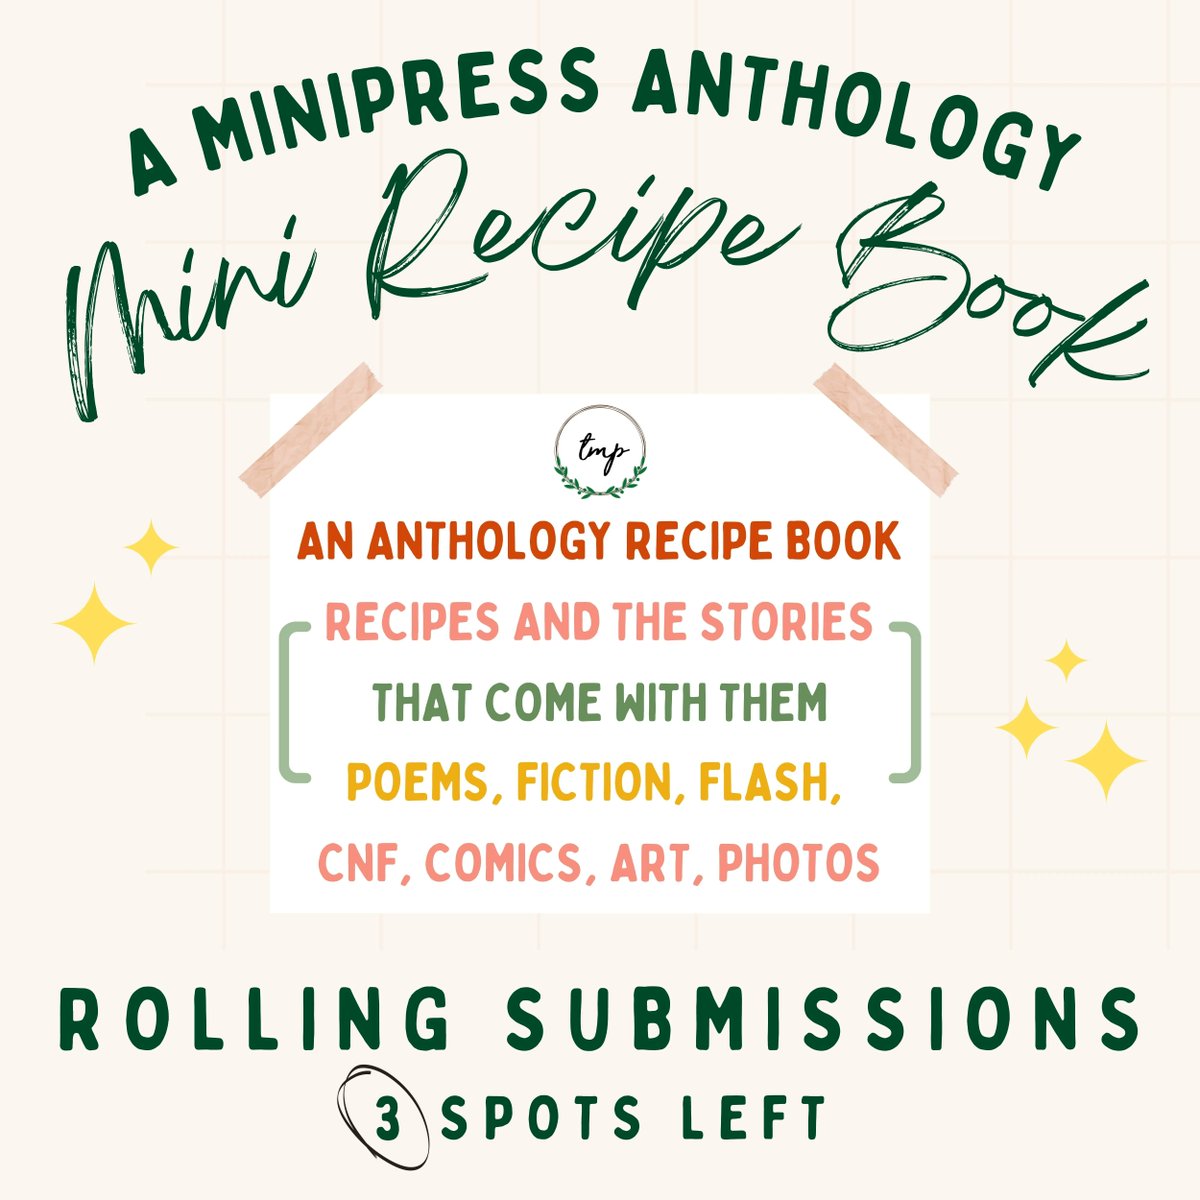 THREE SPOTS LEFT! We're so close to wrapping this submission period up, so send in your recipes and stories!

Submit here: theminisonproject.com/minipress

#MiniPress #RecipeAnthology #FoodWriting